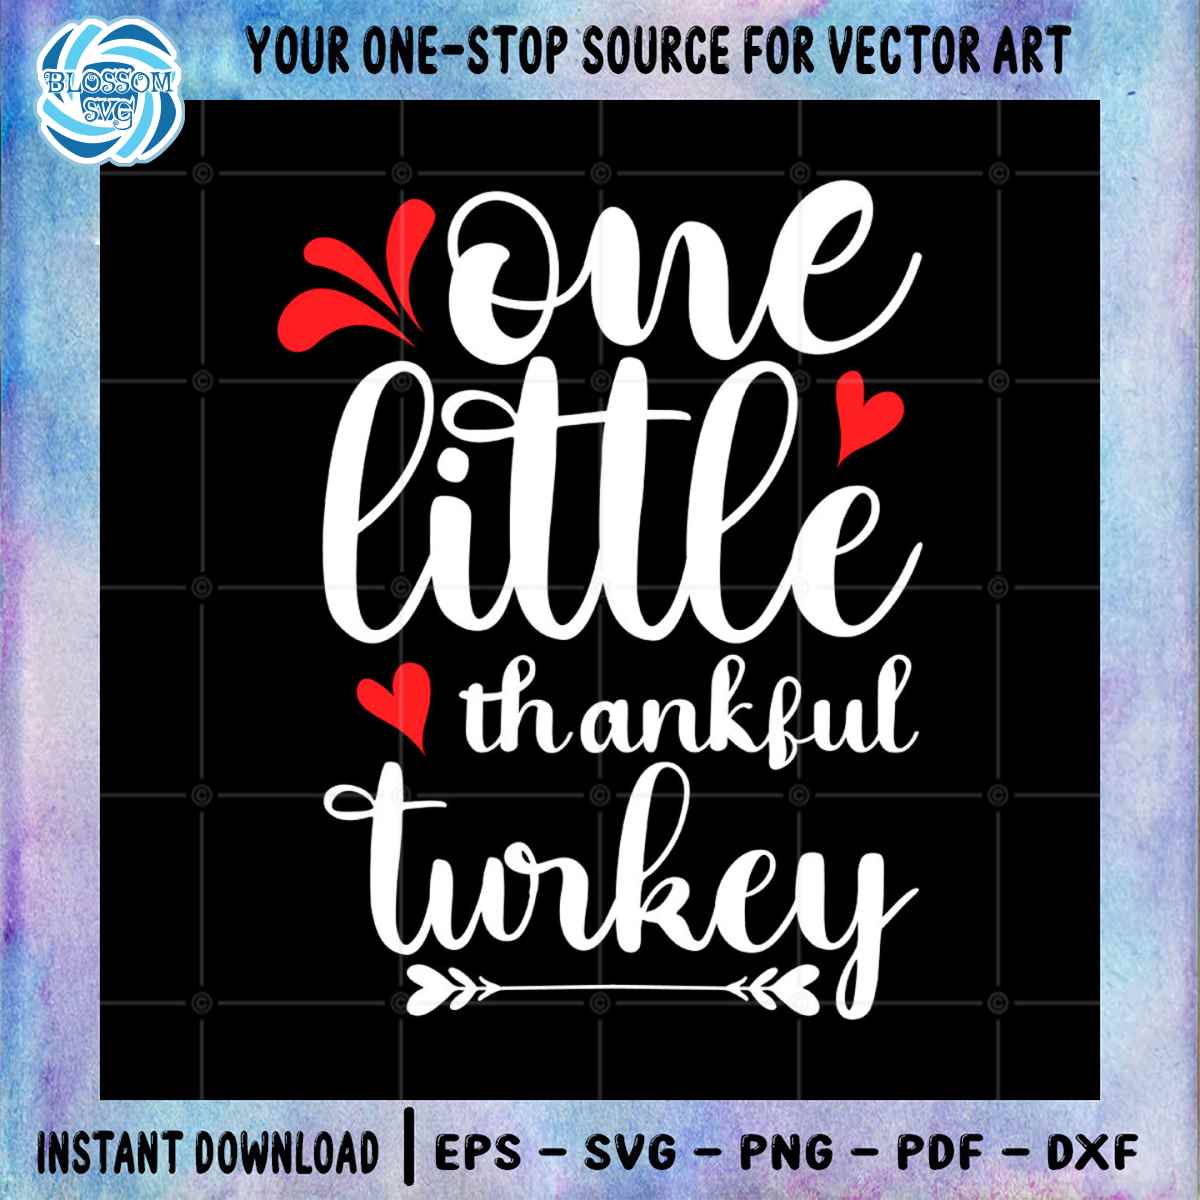 one-little-thankful-turkey-couple-red-heart-svg-png